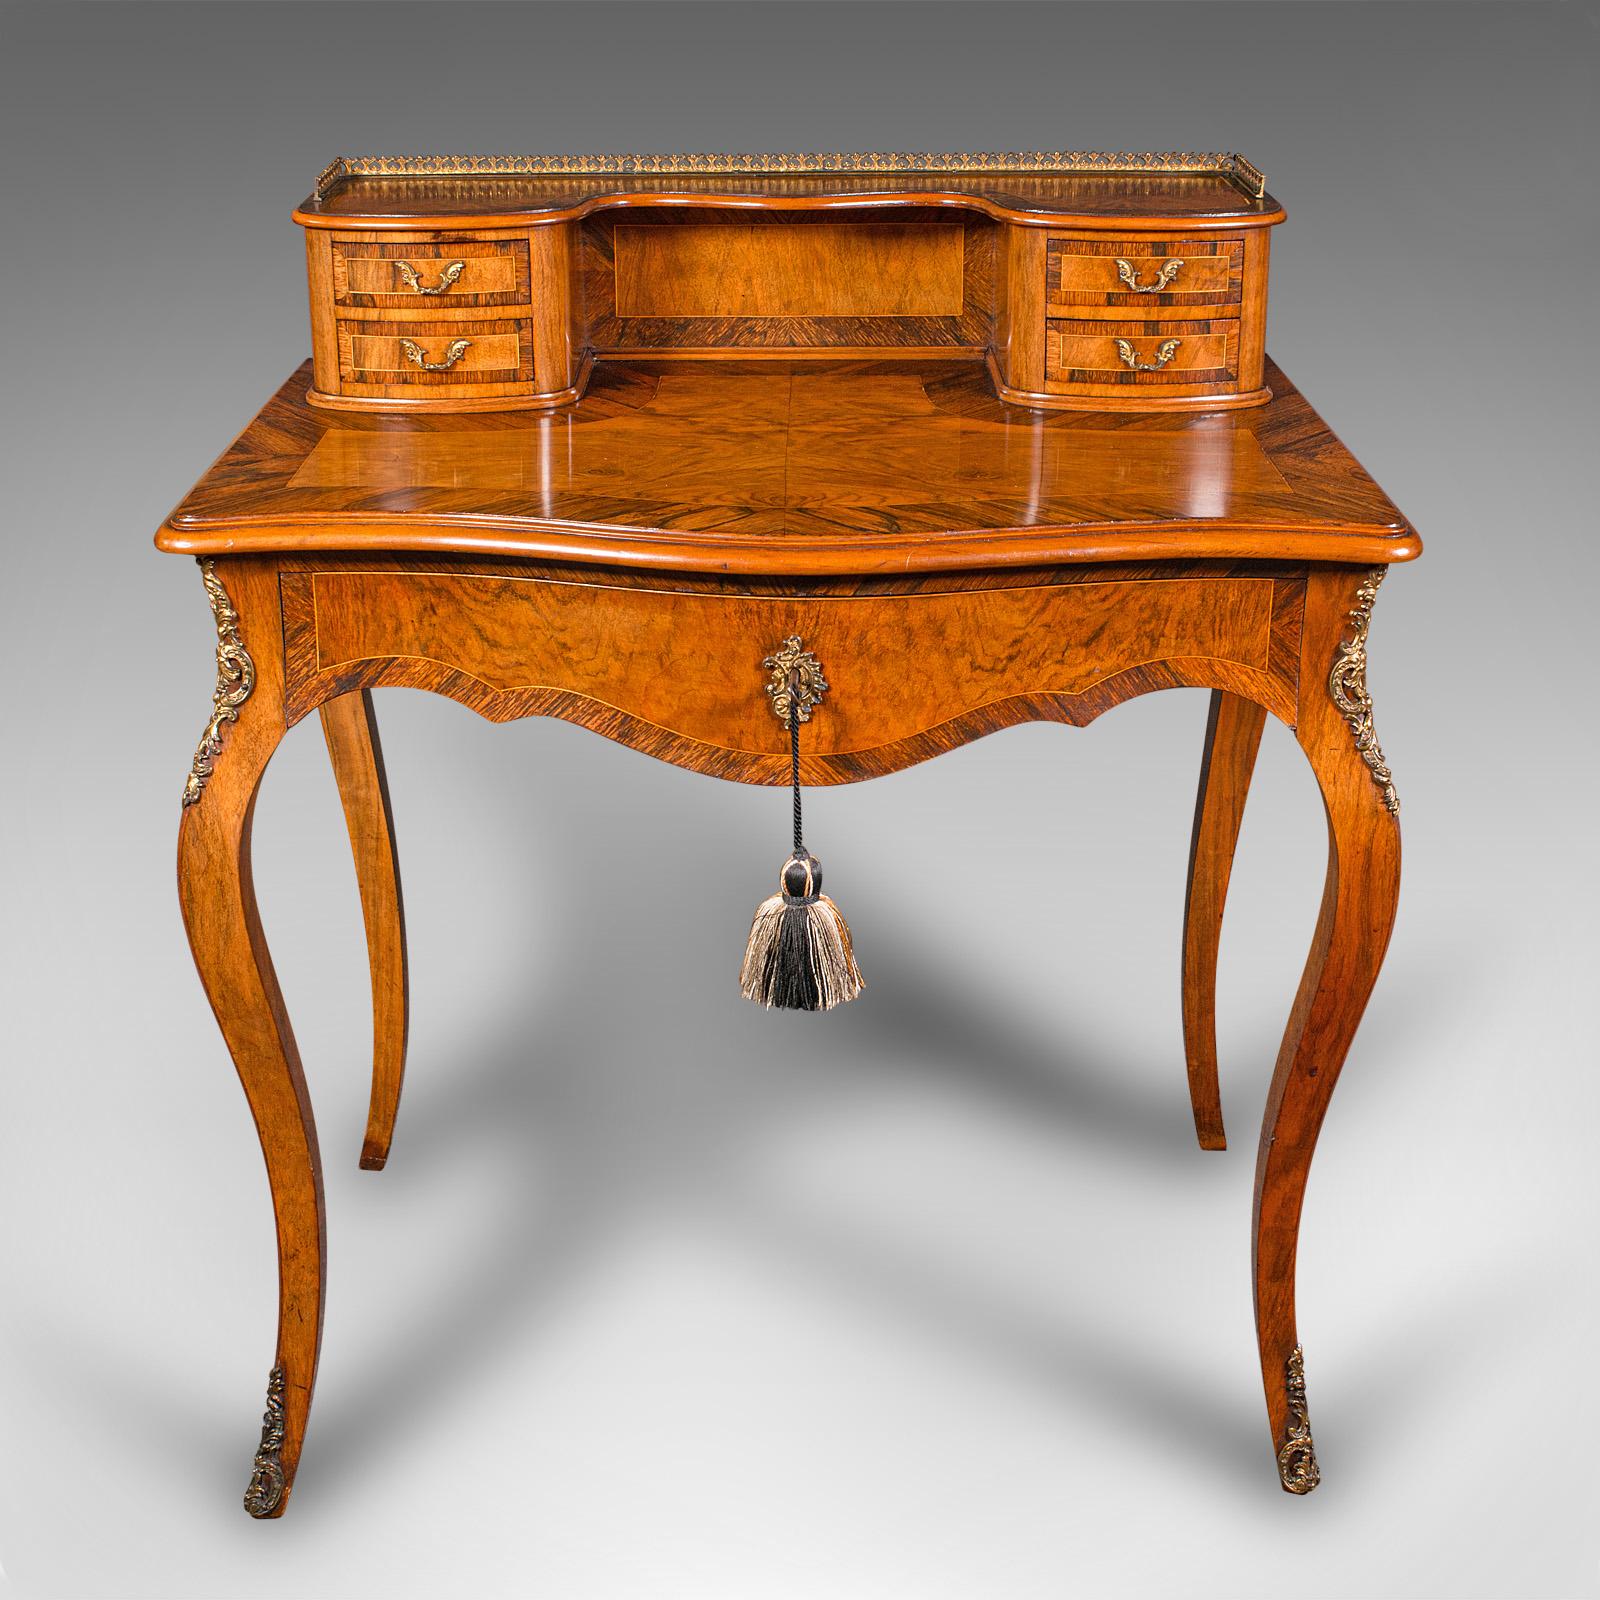 This is an antique bonheur du jour. A French, walnut ladies writing desk, dating to the late Victorian period, circa 1900.

Sumptuous colour and delightful figuring to this fine desk
Displays a desirable aged patina and in good order
Walnut and Burr